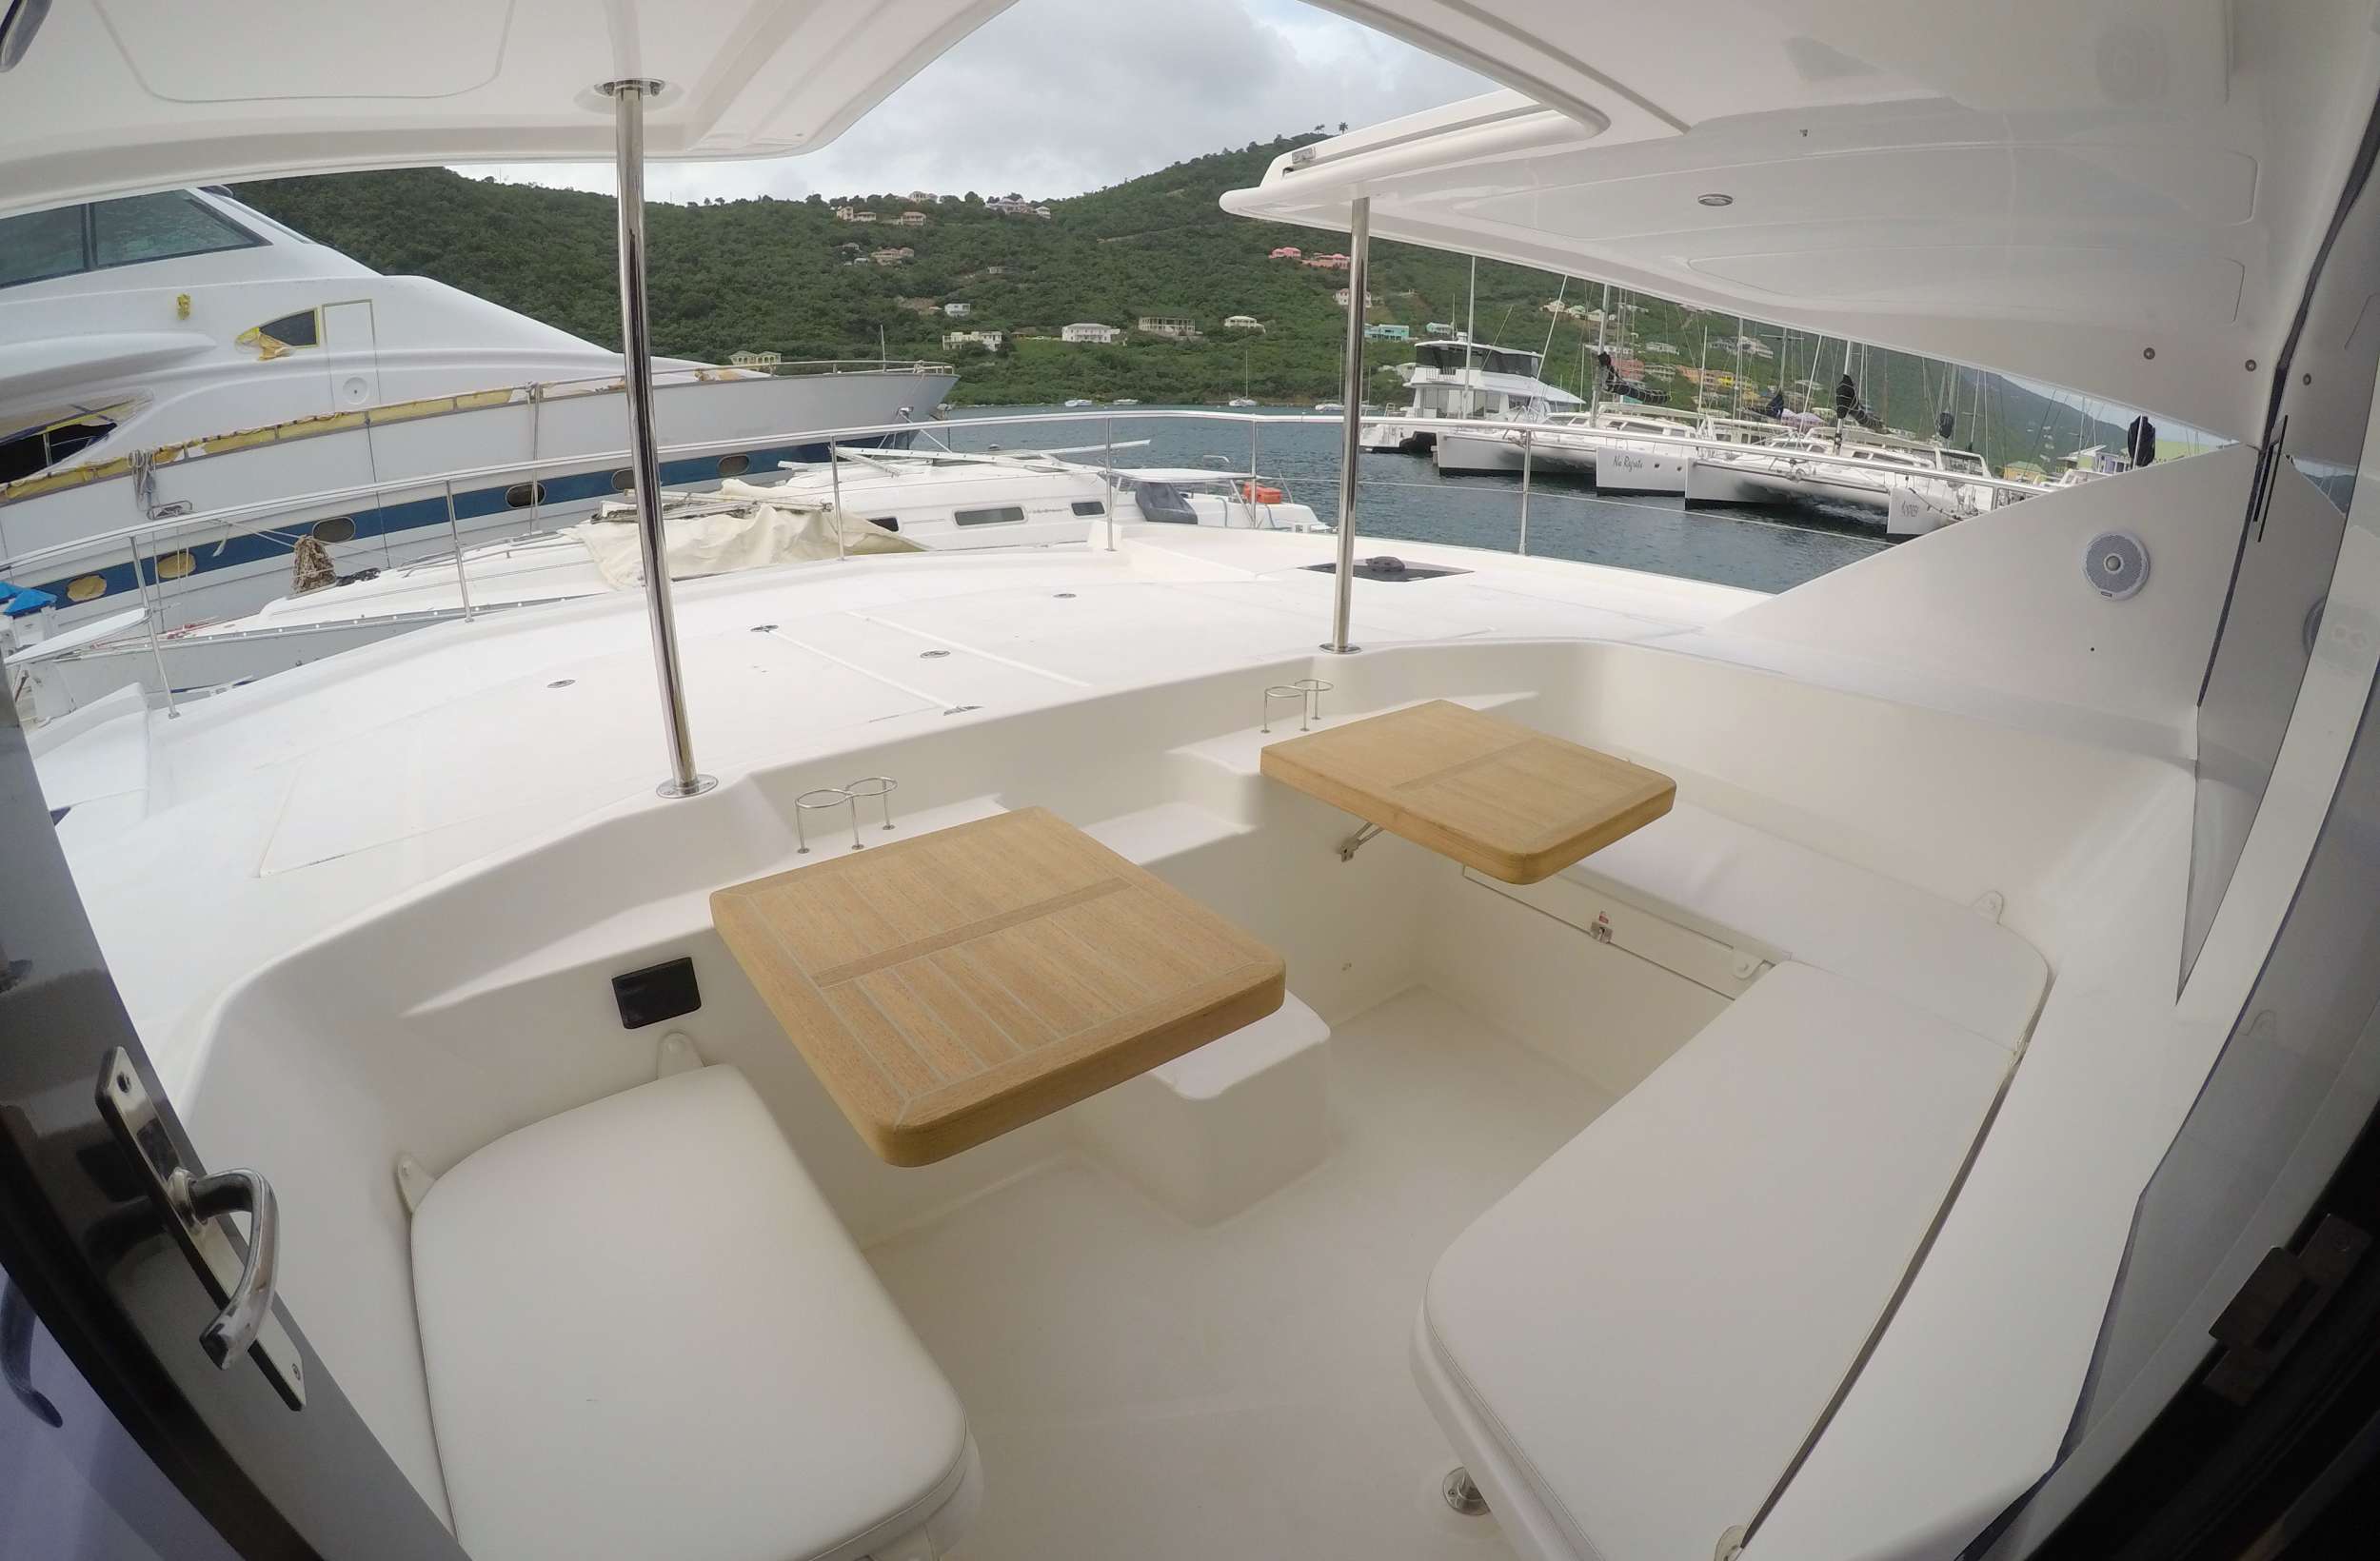 SOMEWHERE HOT Yacht Charter - New teak tables in the forward cockpit